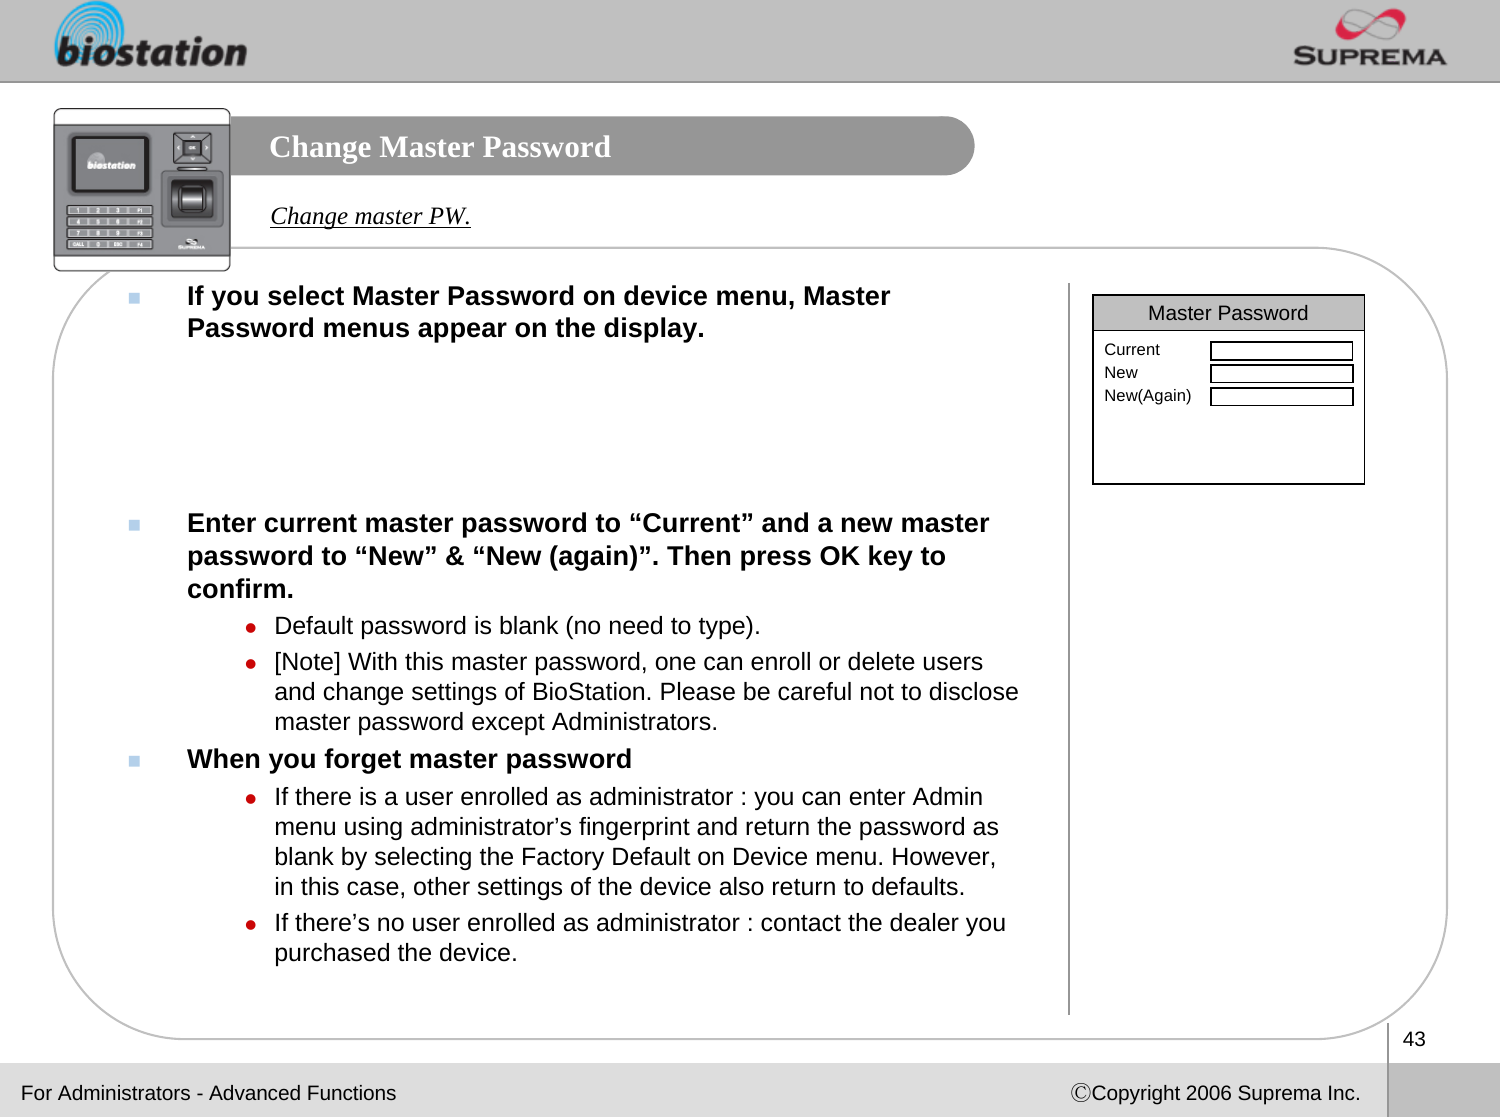 43ⒸCopyright 2006 Suprema Inc.Change Master PasswordIf you select Master Password on device menu, Master Password menus appear on the display. Enter current master password to “Current” and a new master password to “New” &amp; “New (again)”. Then press OK key to confirm. zDefault password is blank (no need to type).  z[Note] With this master password, one can enroll or delete usersand change settings of BioStation. Please be careful not to disclose master password except Administrators. When you forget master passwordzIf there is a user enrolled as administrator : you can enter Admin menu using administrator’s fingerprint and return the password as blank by selecting the Factory Default on Device menu. However, in this case, other settings of the device also return to defaults.zIf there’s no user enrolled as administrator : contact the dealer you purchased the device.Master PasswordCurrentNewNew(Again)Change master PW.For Administrators - Advanced Functions